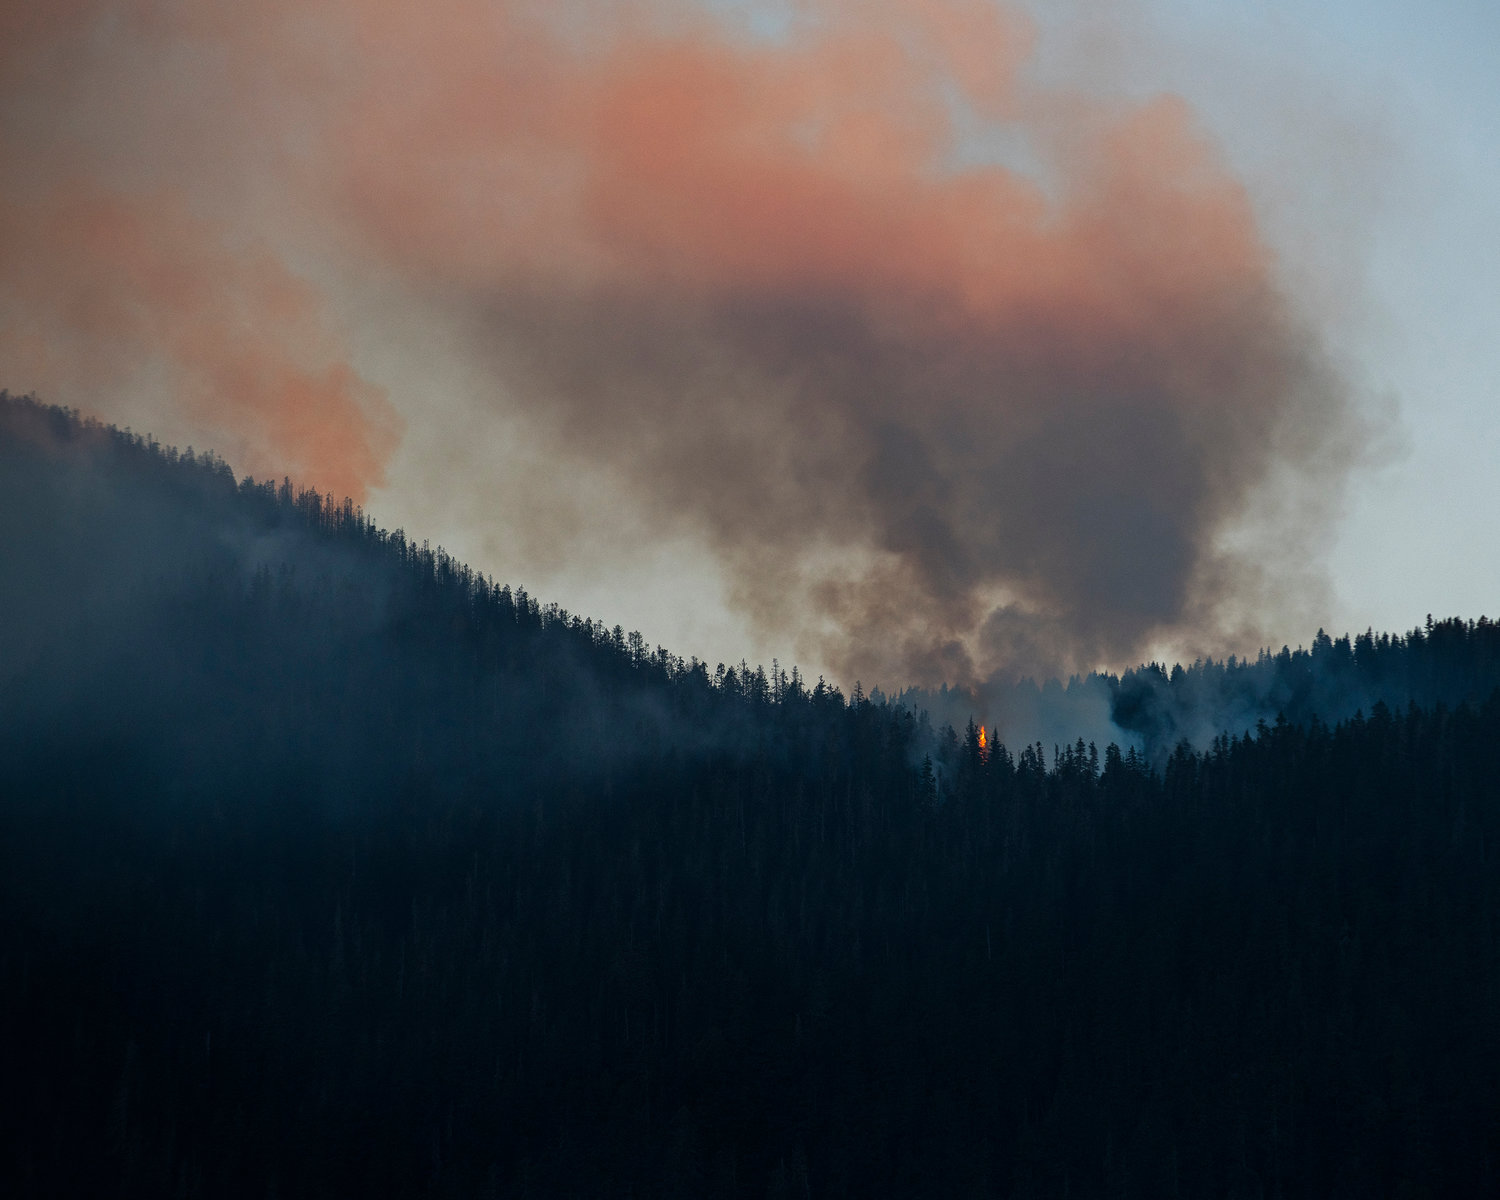 The Goat Rocks Fire consumes trees east of Packwood on Tuesday seen from U.S. Highway 12.